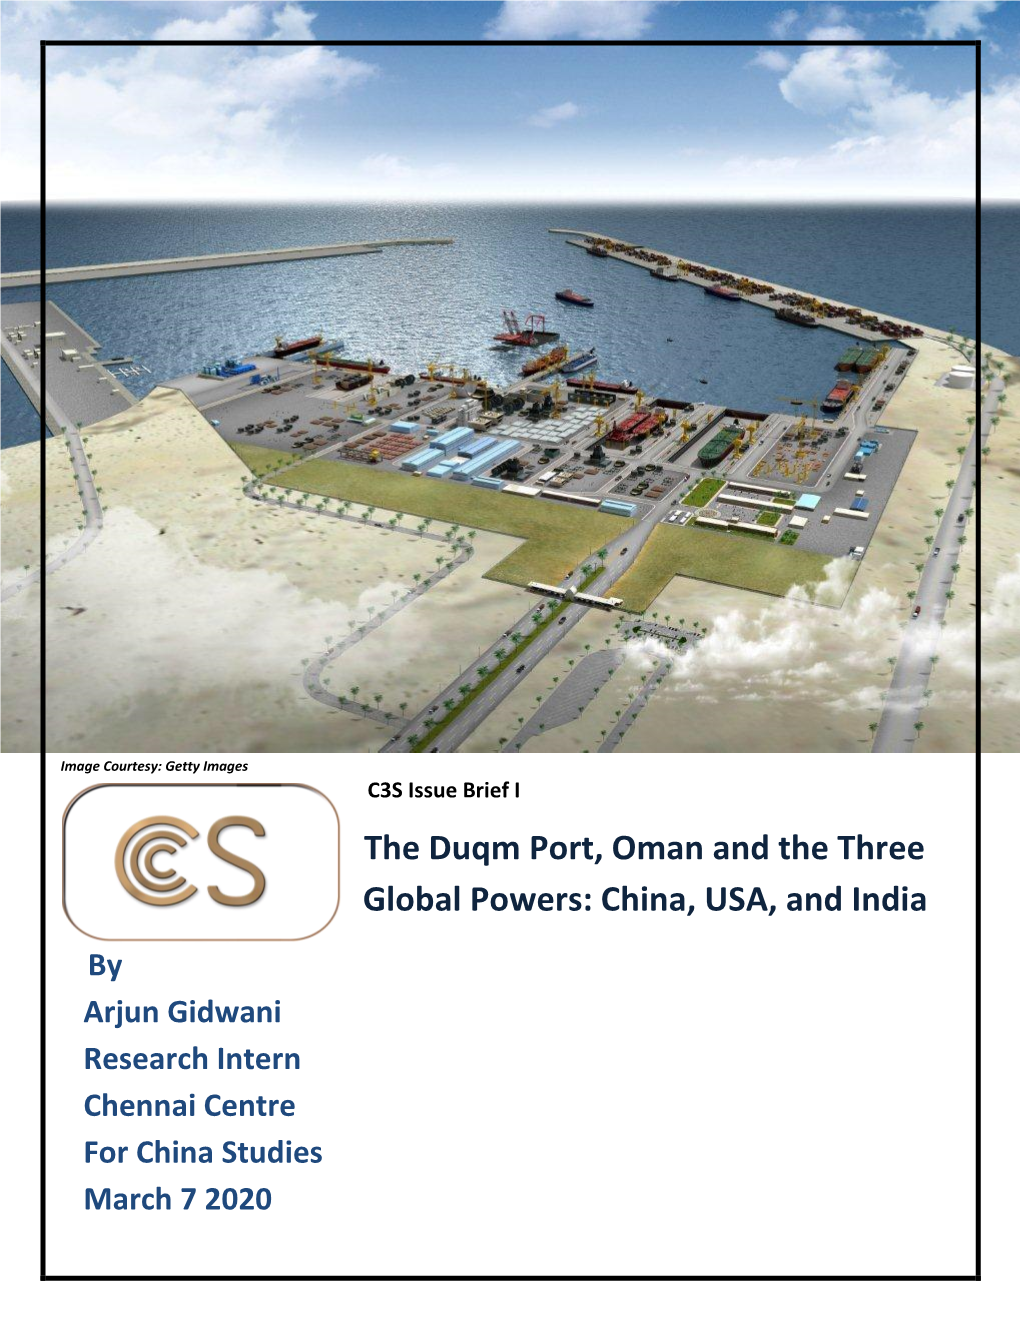 The Duqm Port, Oman and the Three Global Powers: China, USA, and India